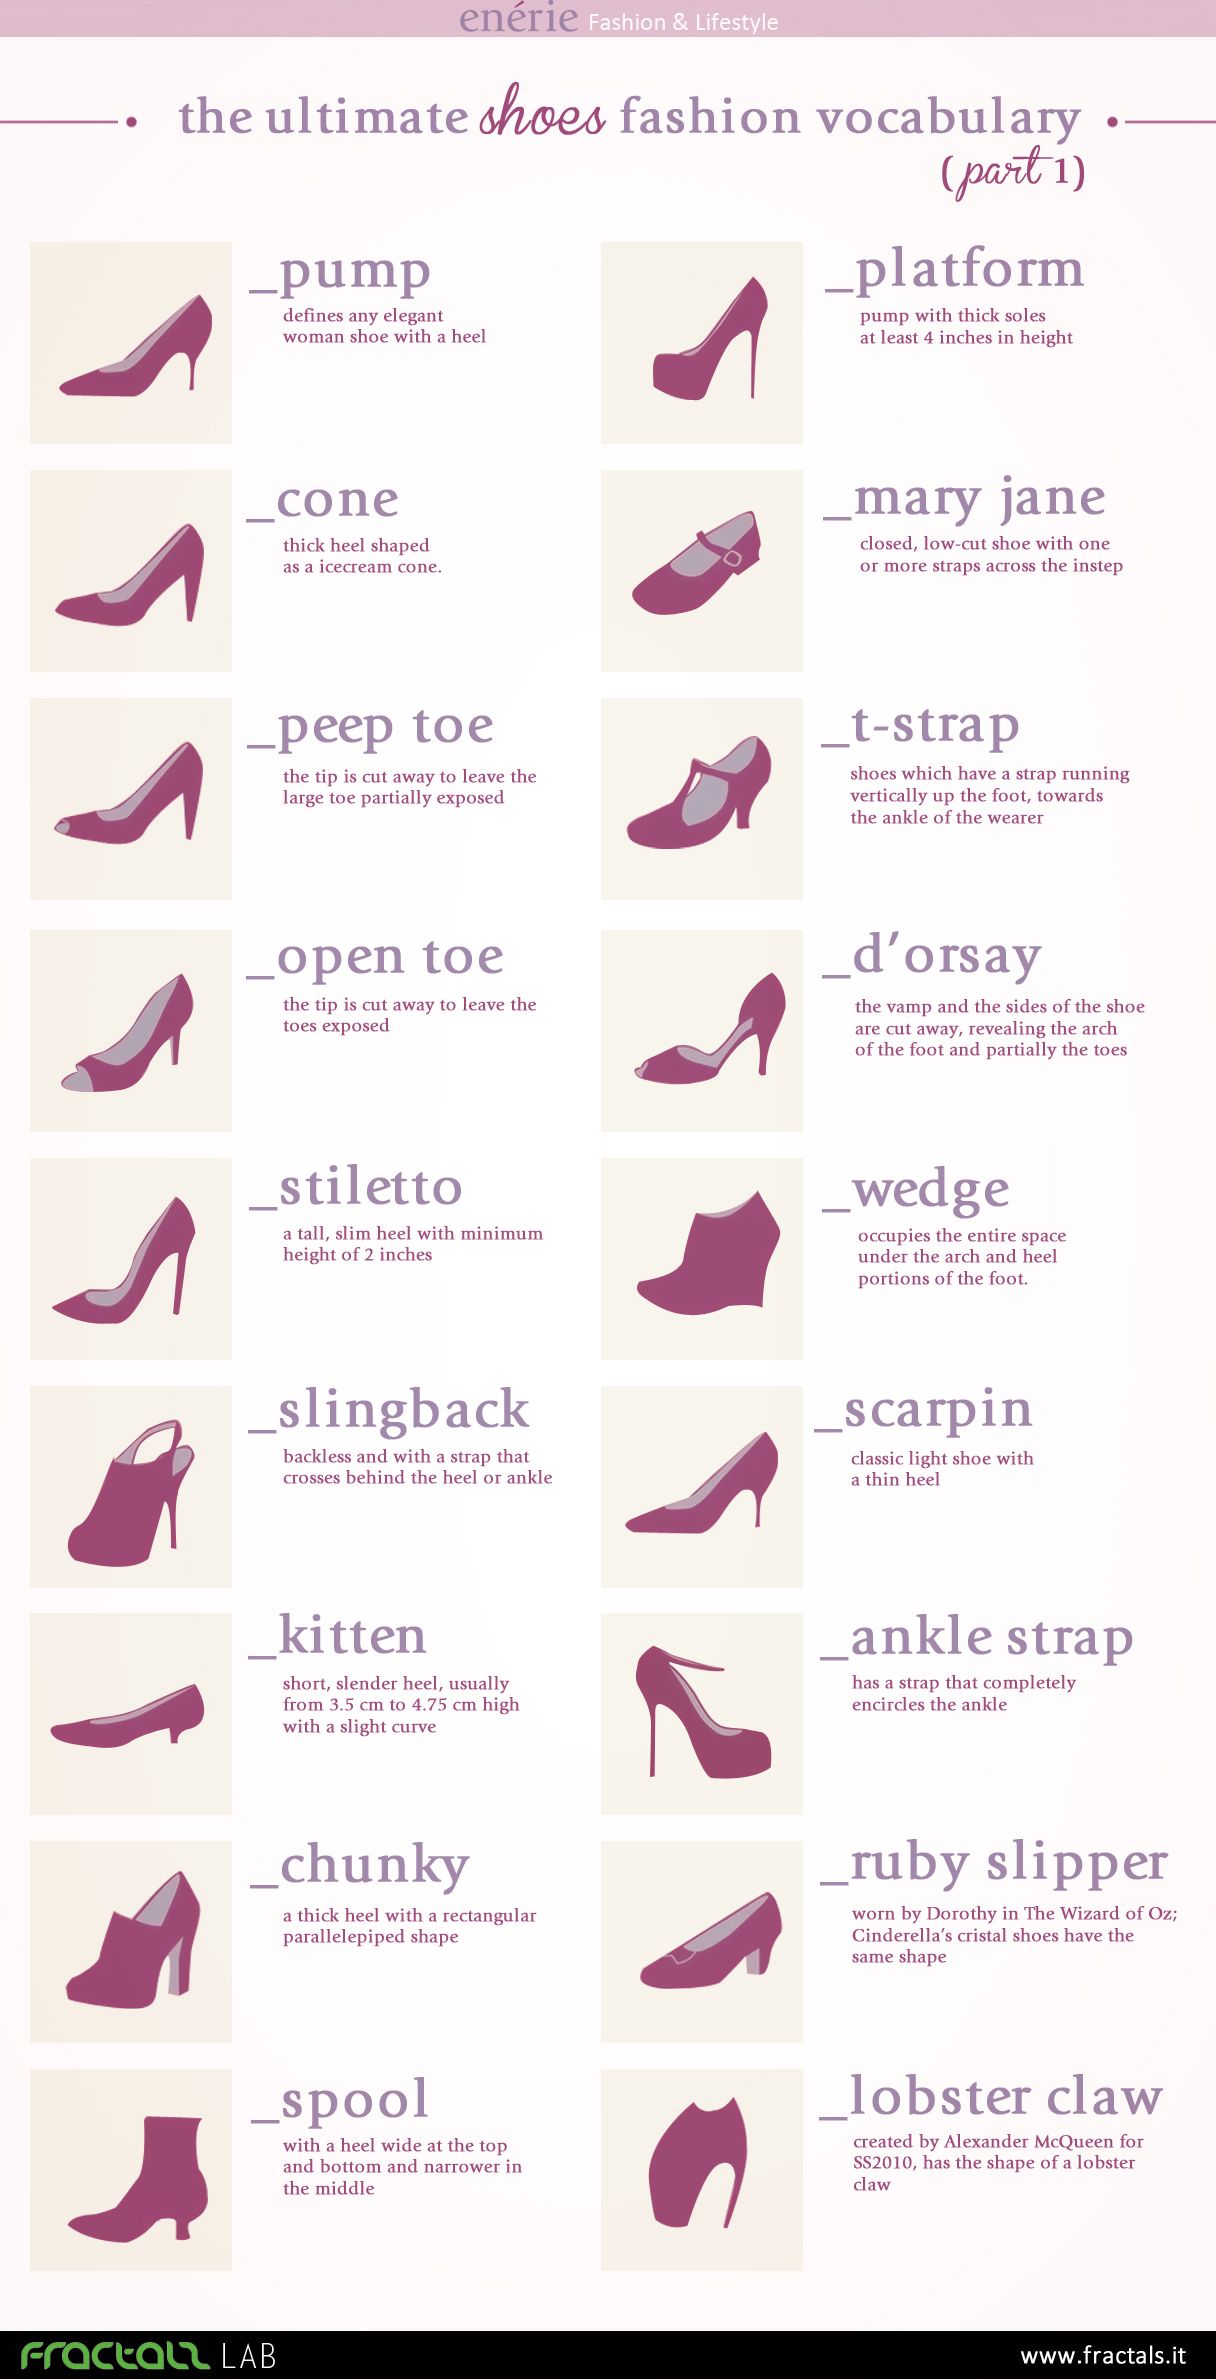 The Ultimate Shoes Fashion Vocabulary